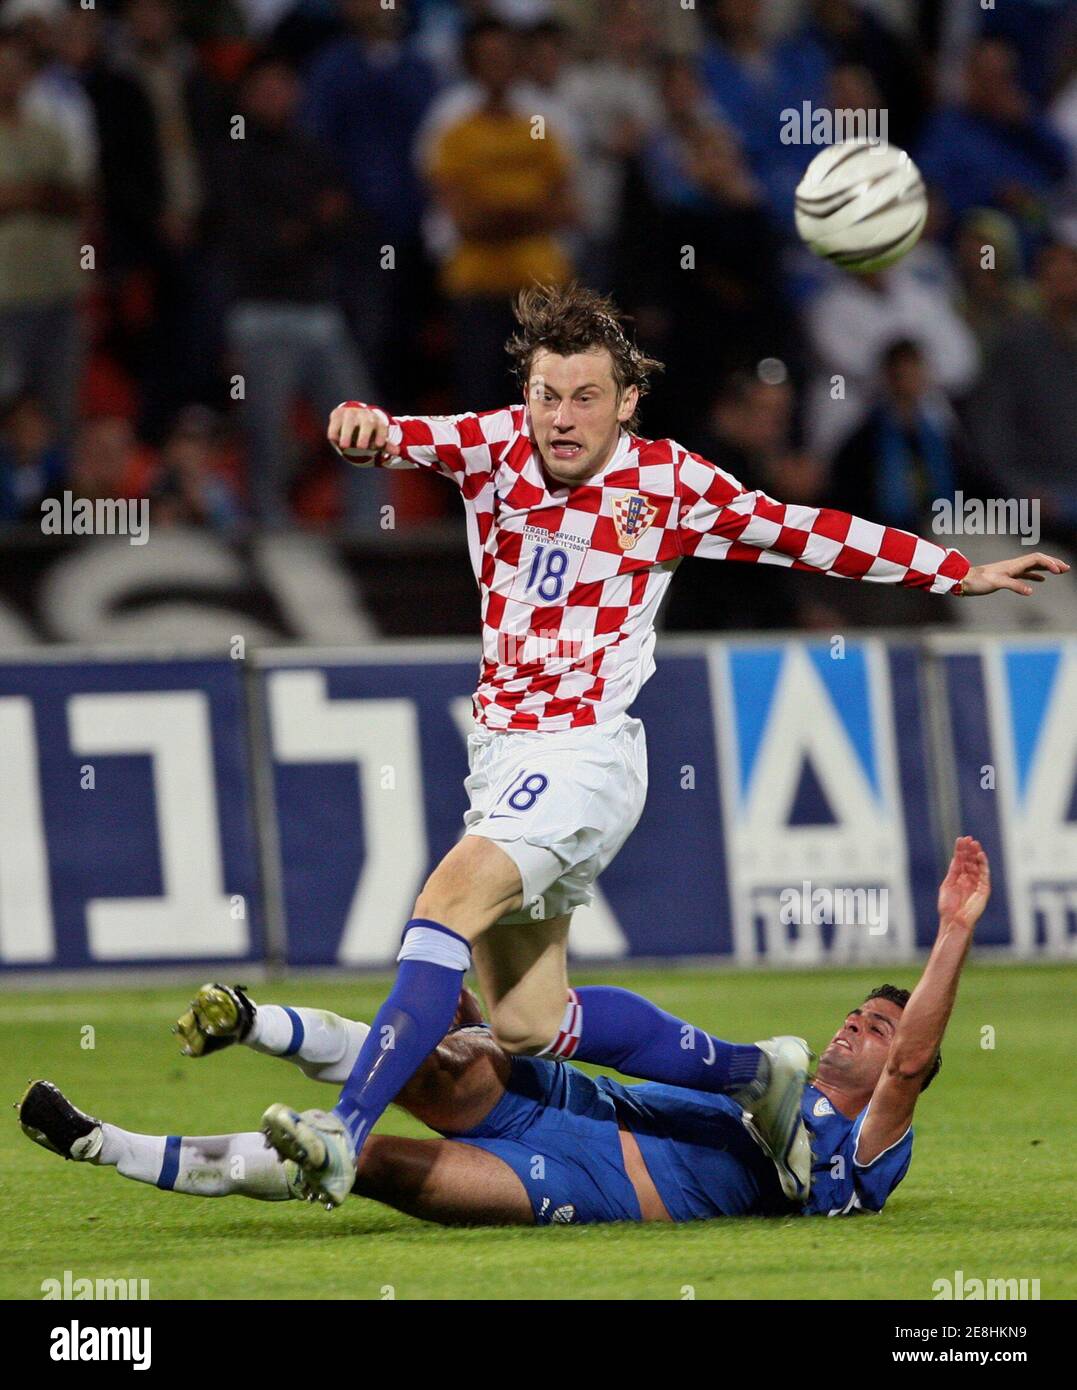 Croatia's Ivica Olic (top) is tackled by Israel's Adoram Keisi during their Group E Euro 2008 qualifying soccer match at Ramat Gan stadium in Tel Aviv, November 15, 2006.      REUTERS/Oleg Popov   (ISRAEL) Stock Photo